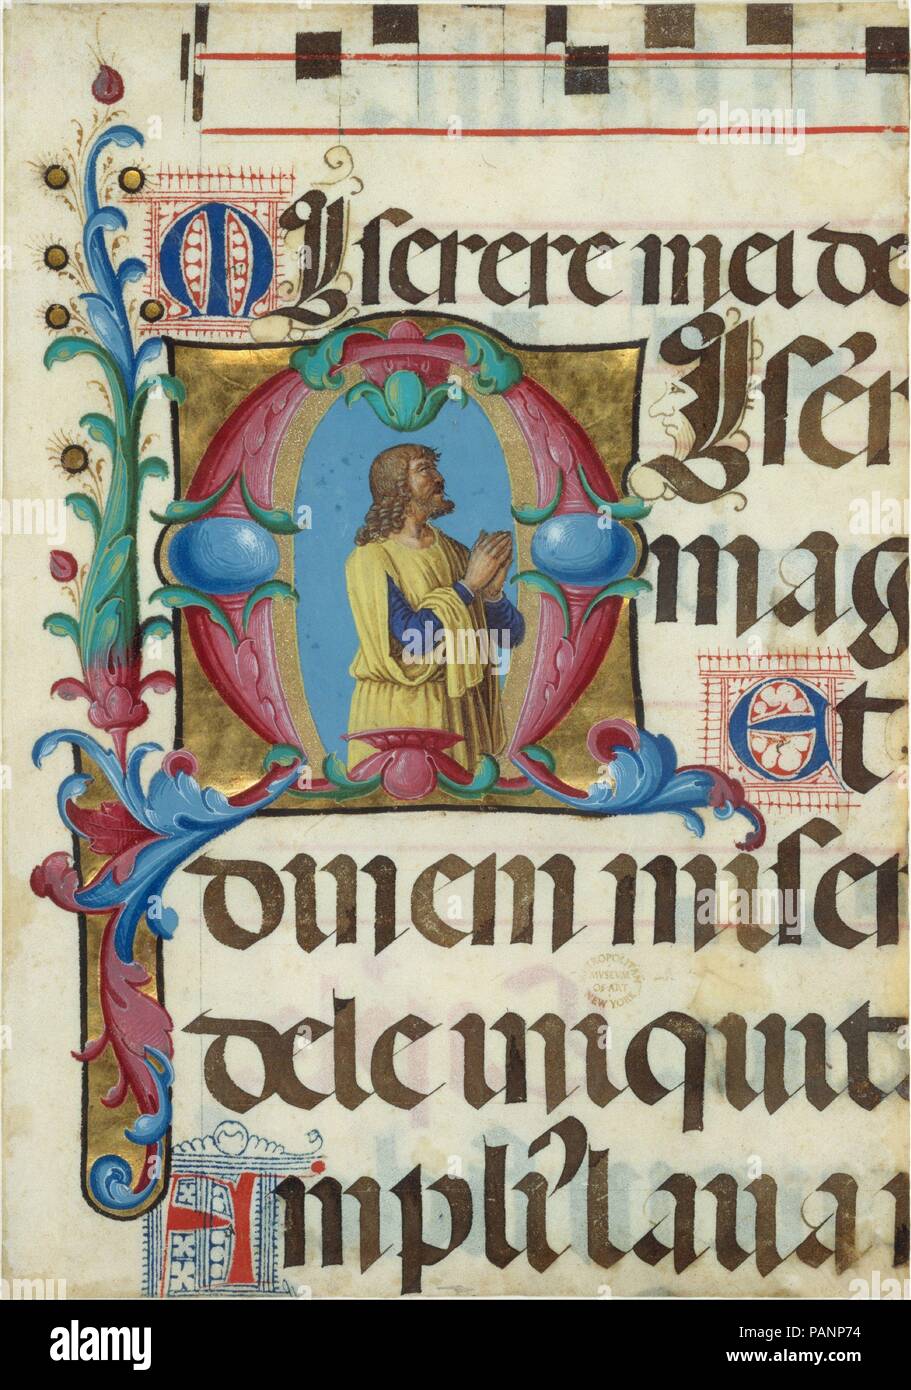 Manuscript Illumination with David in Prayer in an Initial M, from a Psalter. Artist: Girolamo dai Libri (Italian, Verona 1474-1555 Verona). Culture: Italian. Dimensions: Overall: 8 15/16 x 6 1/4 in. (22.7 x 15.9 cm)  Illumination: 3 3/16 x 3 1/8 in. (8.1 x 8 cm)  Mat: 19 3/16 x 14 3/16 in. (48.7 x 36.1 cm). Date: 1501-2.  Like the singing monks in Girolamo dai Libri's miniature executed for the same psalter (displayed nearby), David appears here in prayer with his mouth open and his gaze turned heavenward. In many images of David, God the Father appears above him as the object of his inspirat Stock Photo